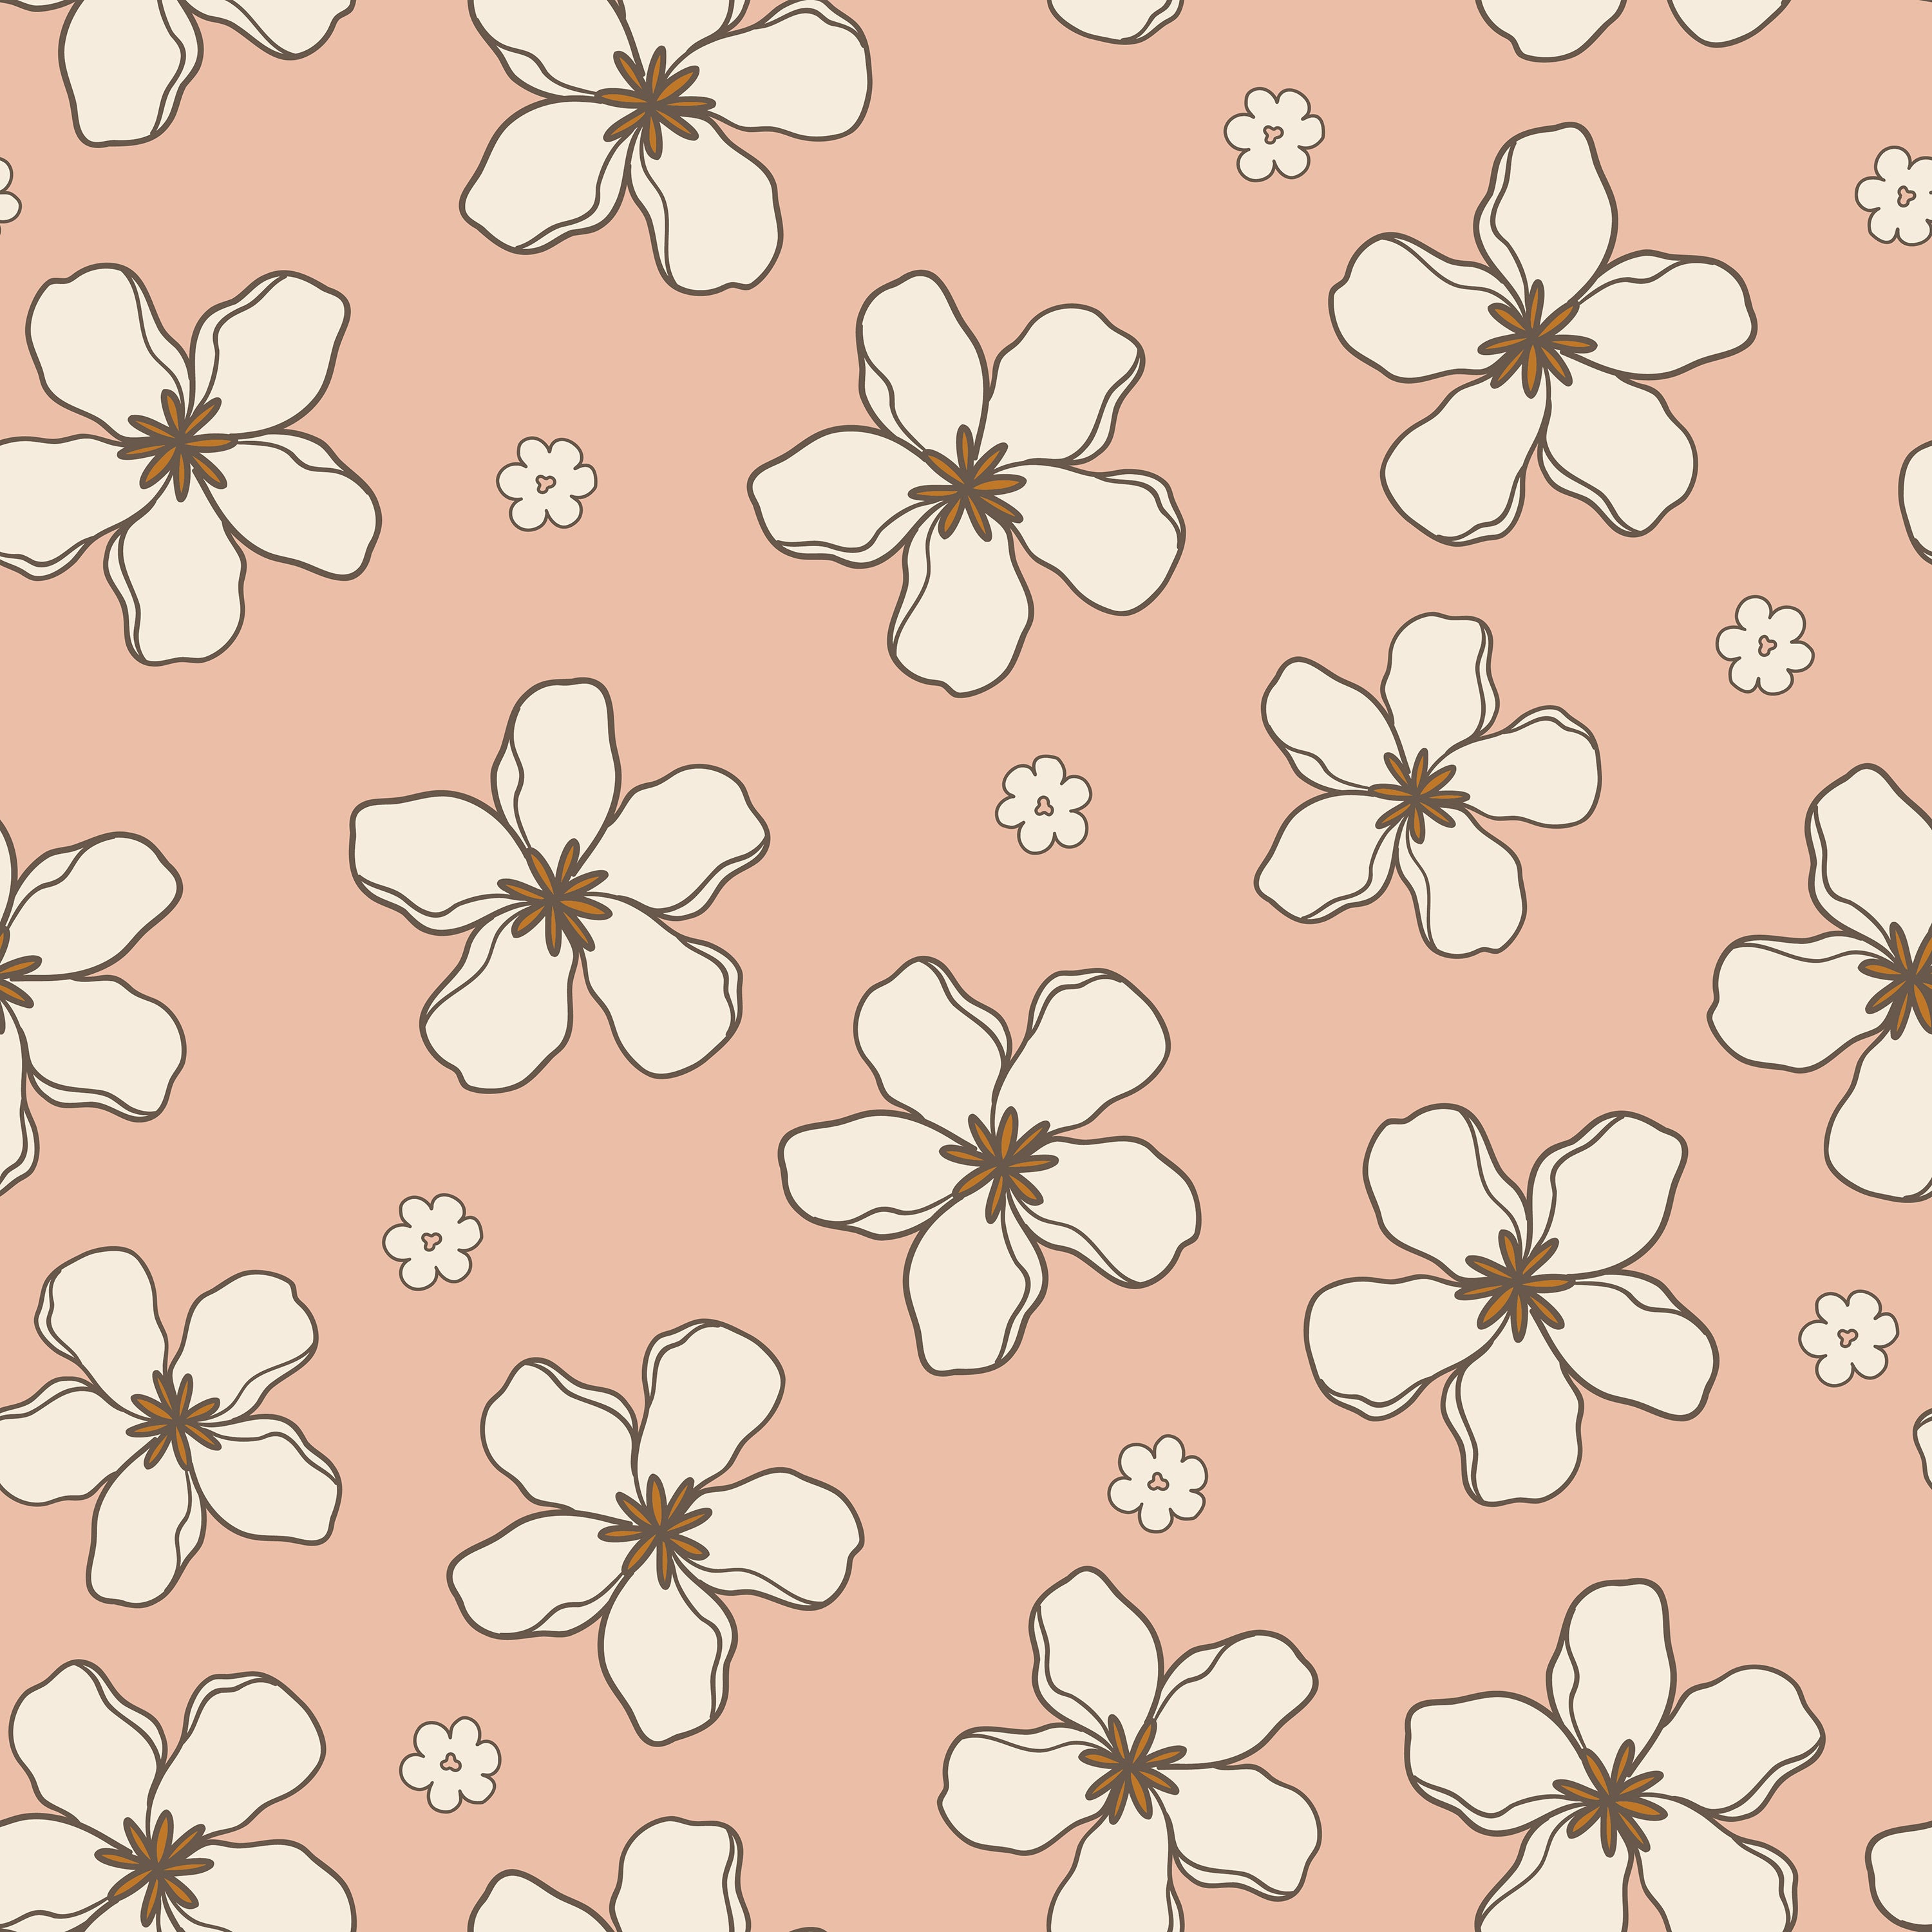 A close-up view of the Retro Pink Flowers Wallpaper, featuring large white flowers with golden centers spread across a soft pink background, creating a fresh and charming appearance.